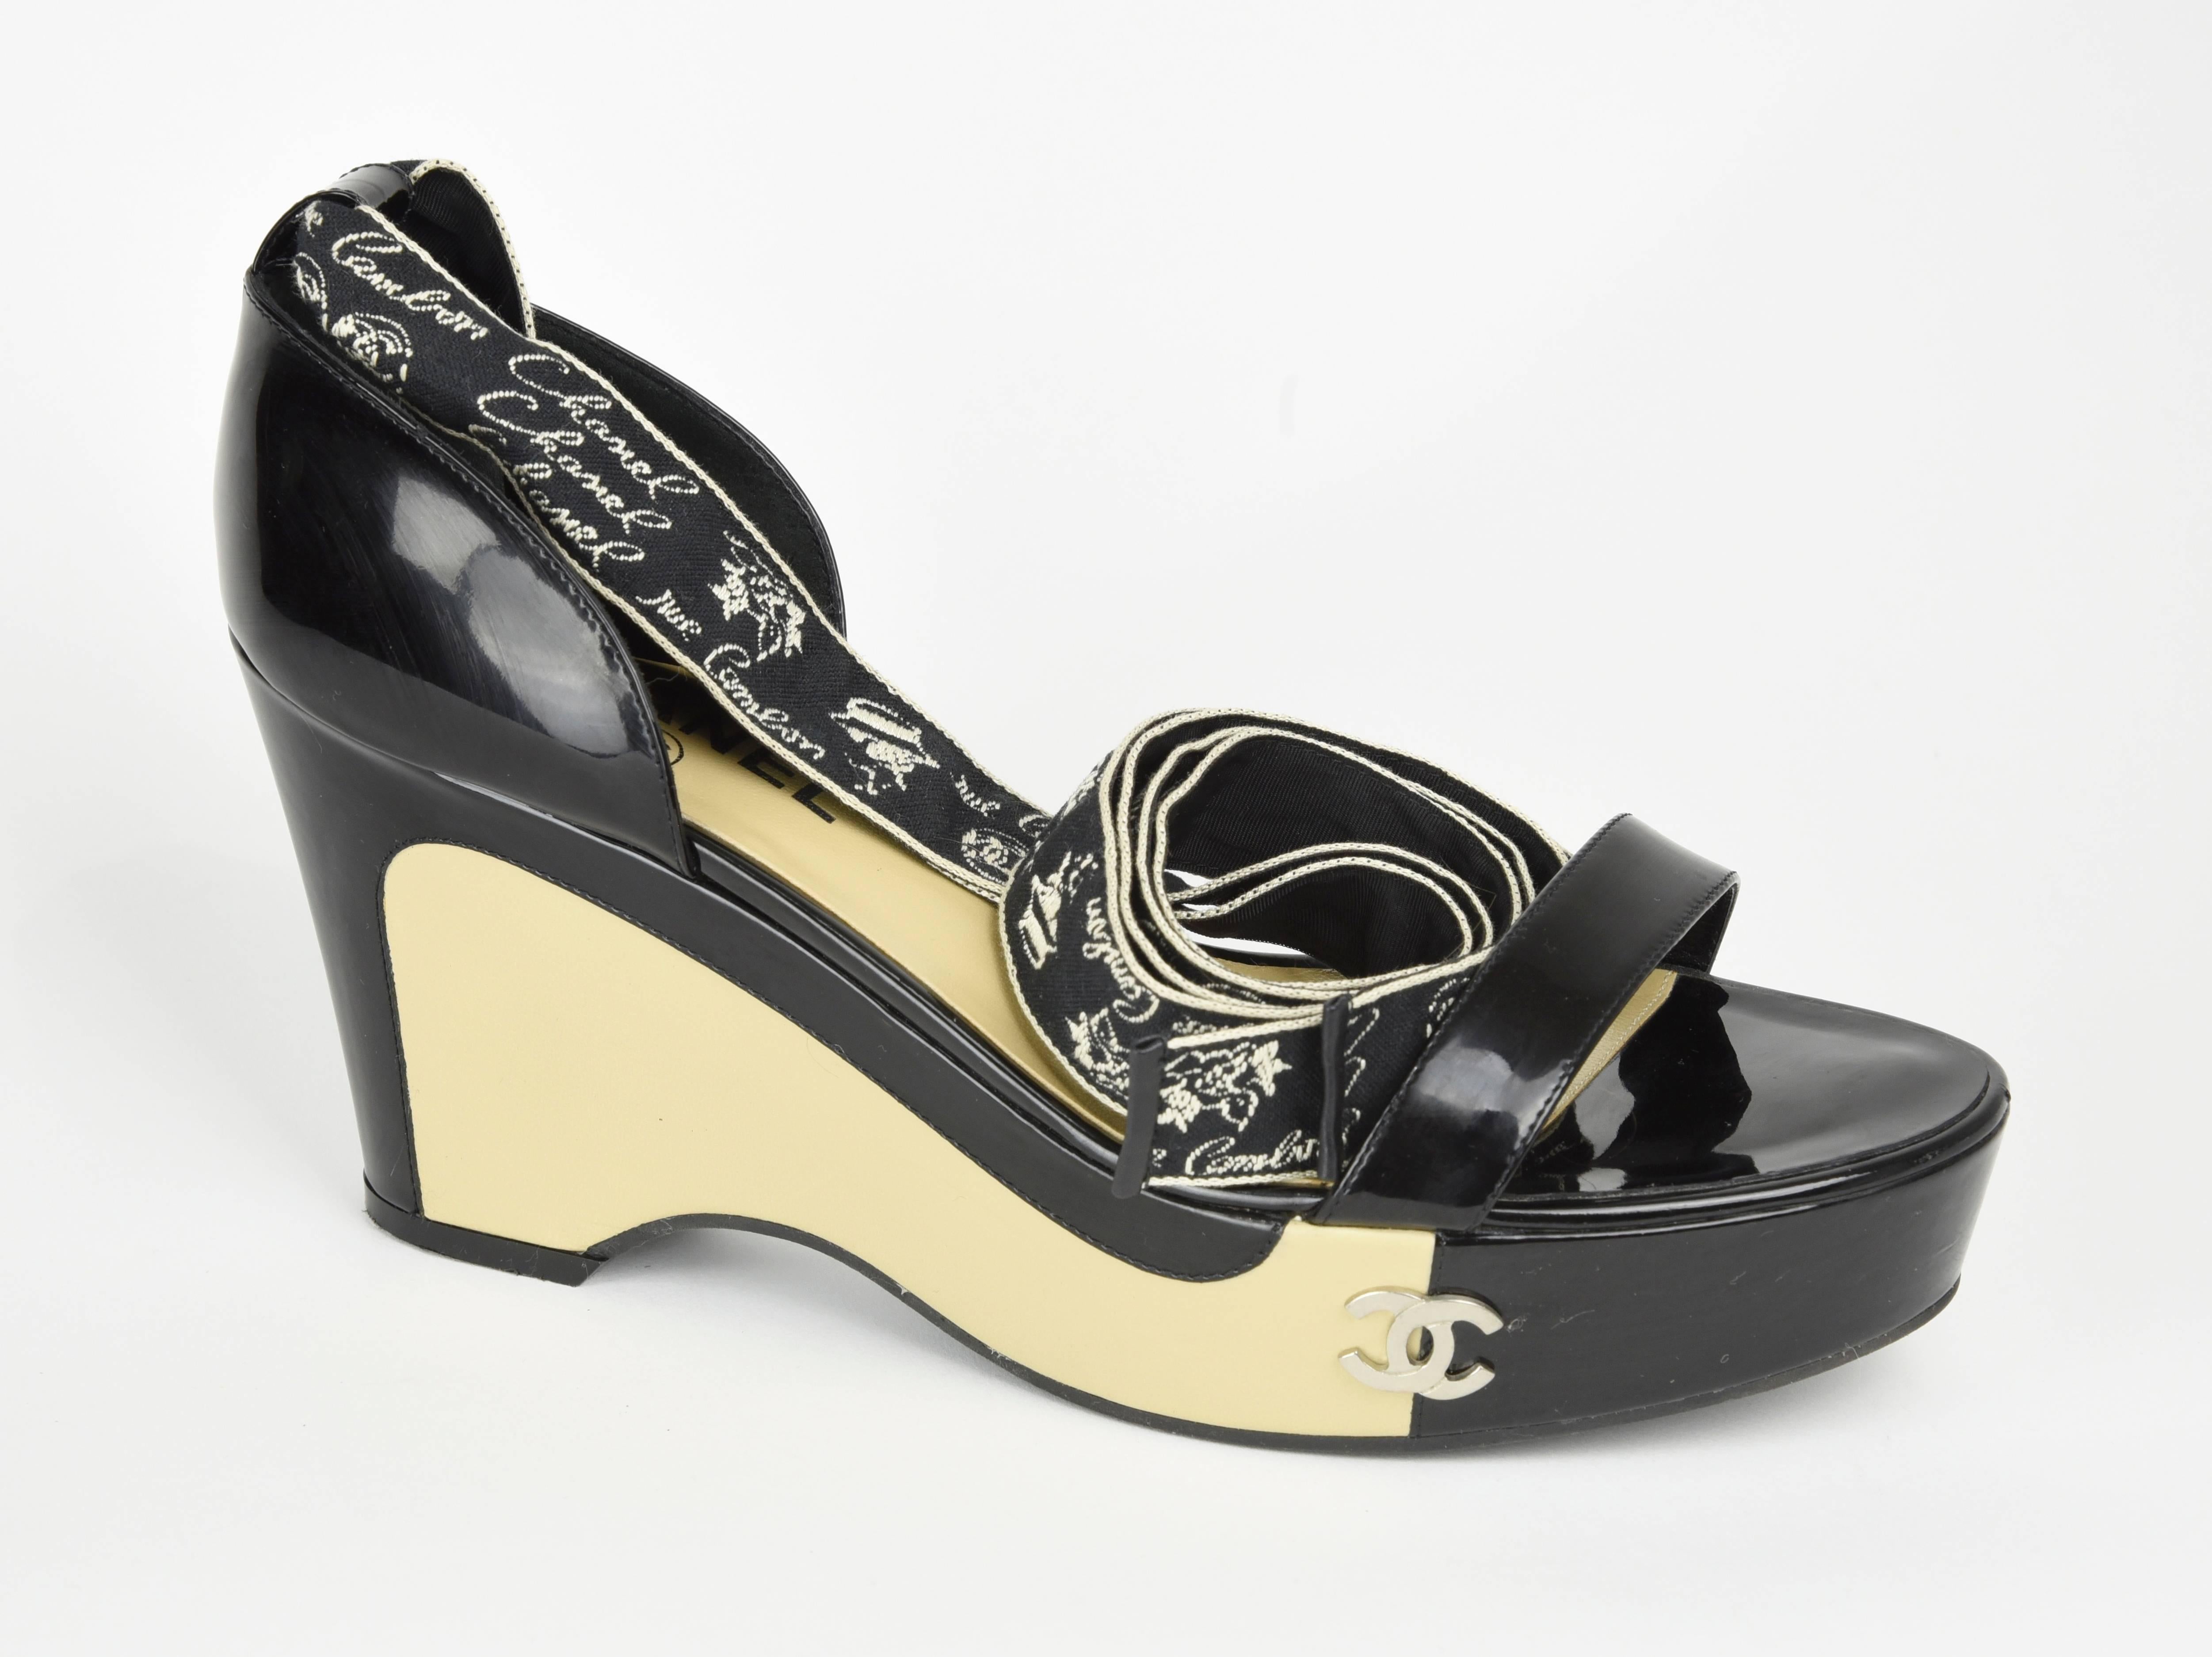 Chanel gorgeous graphic design in black and beige patent leather platform sandals with 56" black and white woven pattern 1" ribbons with woven images of Coco Chanel in a hat and "Rue Cambon", that wrap two times around the ankle.